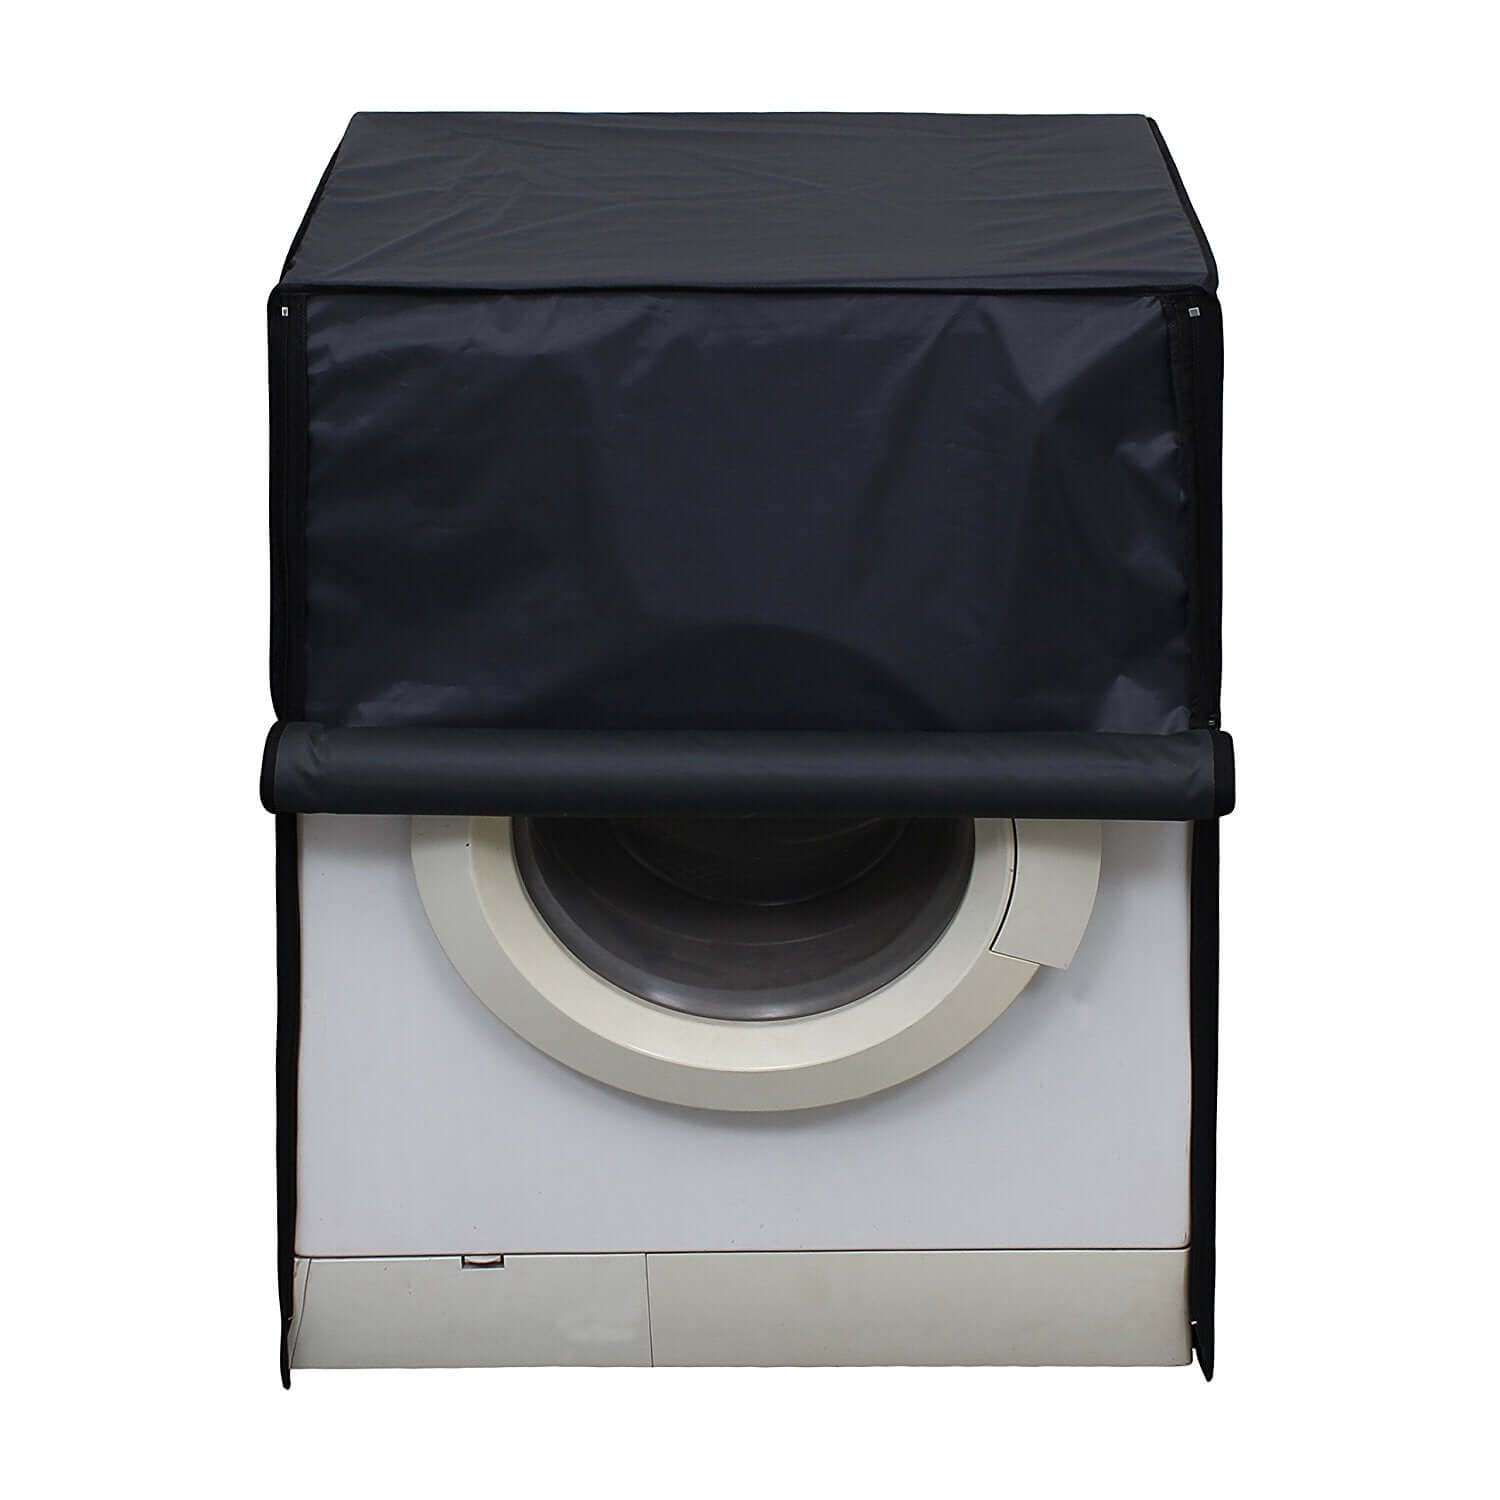 Fully Automatic Front Load Washing Machine Cover, Grey